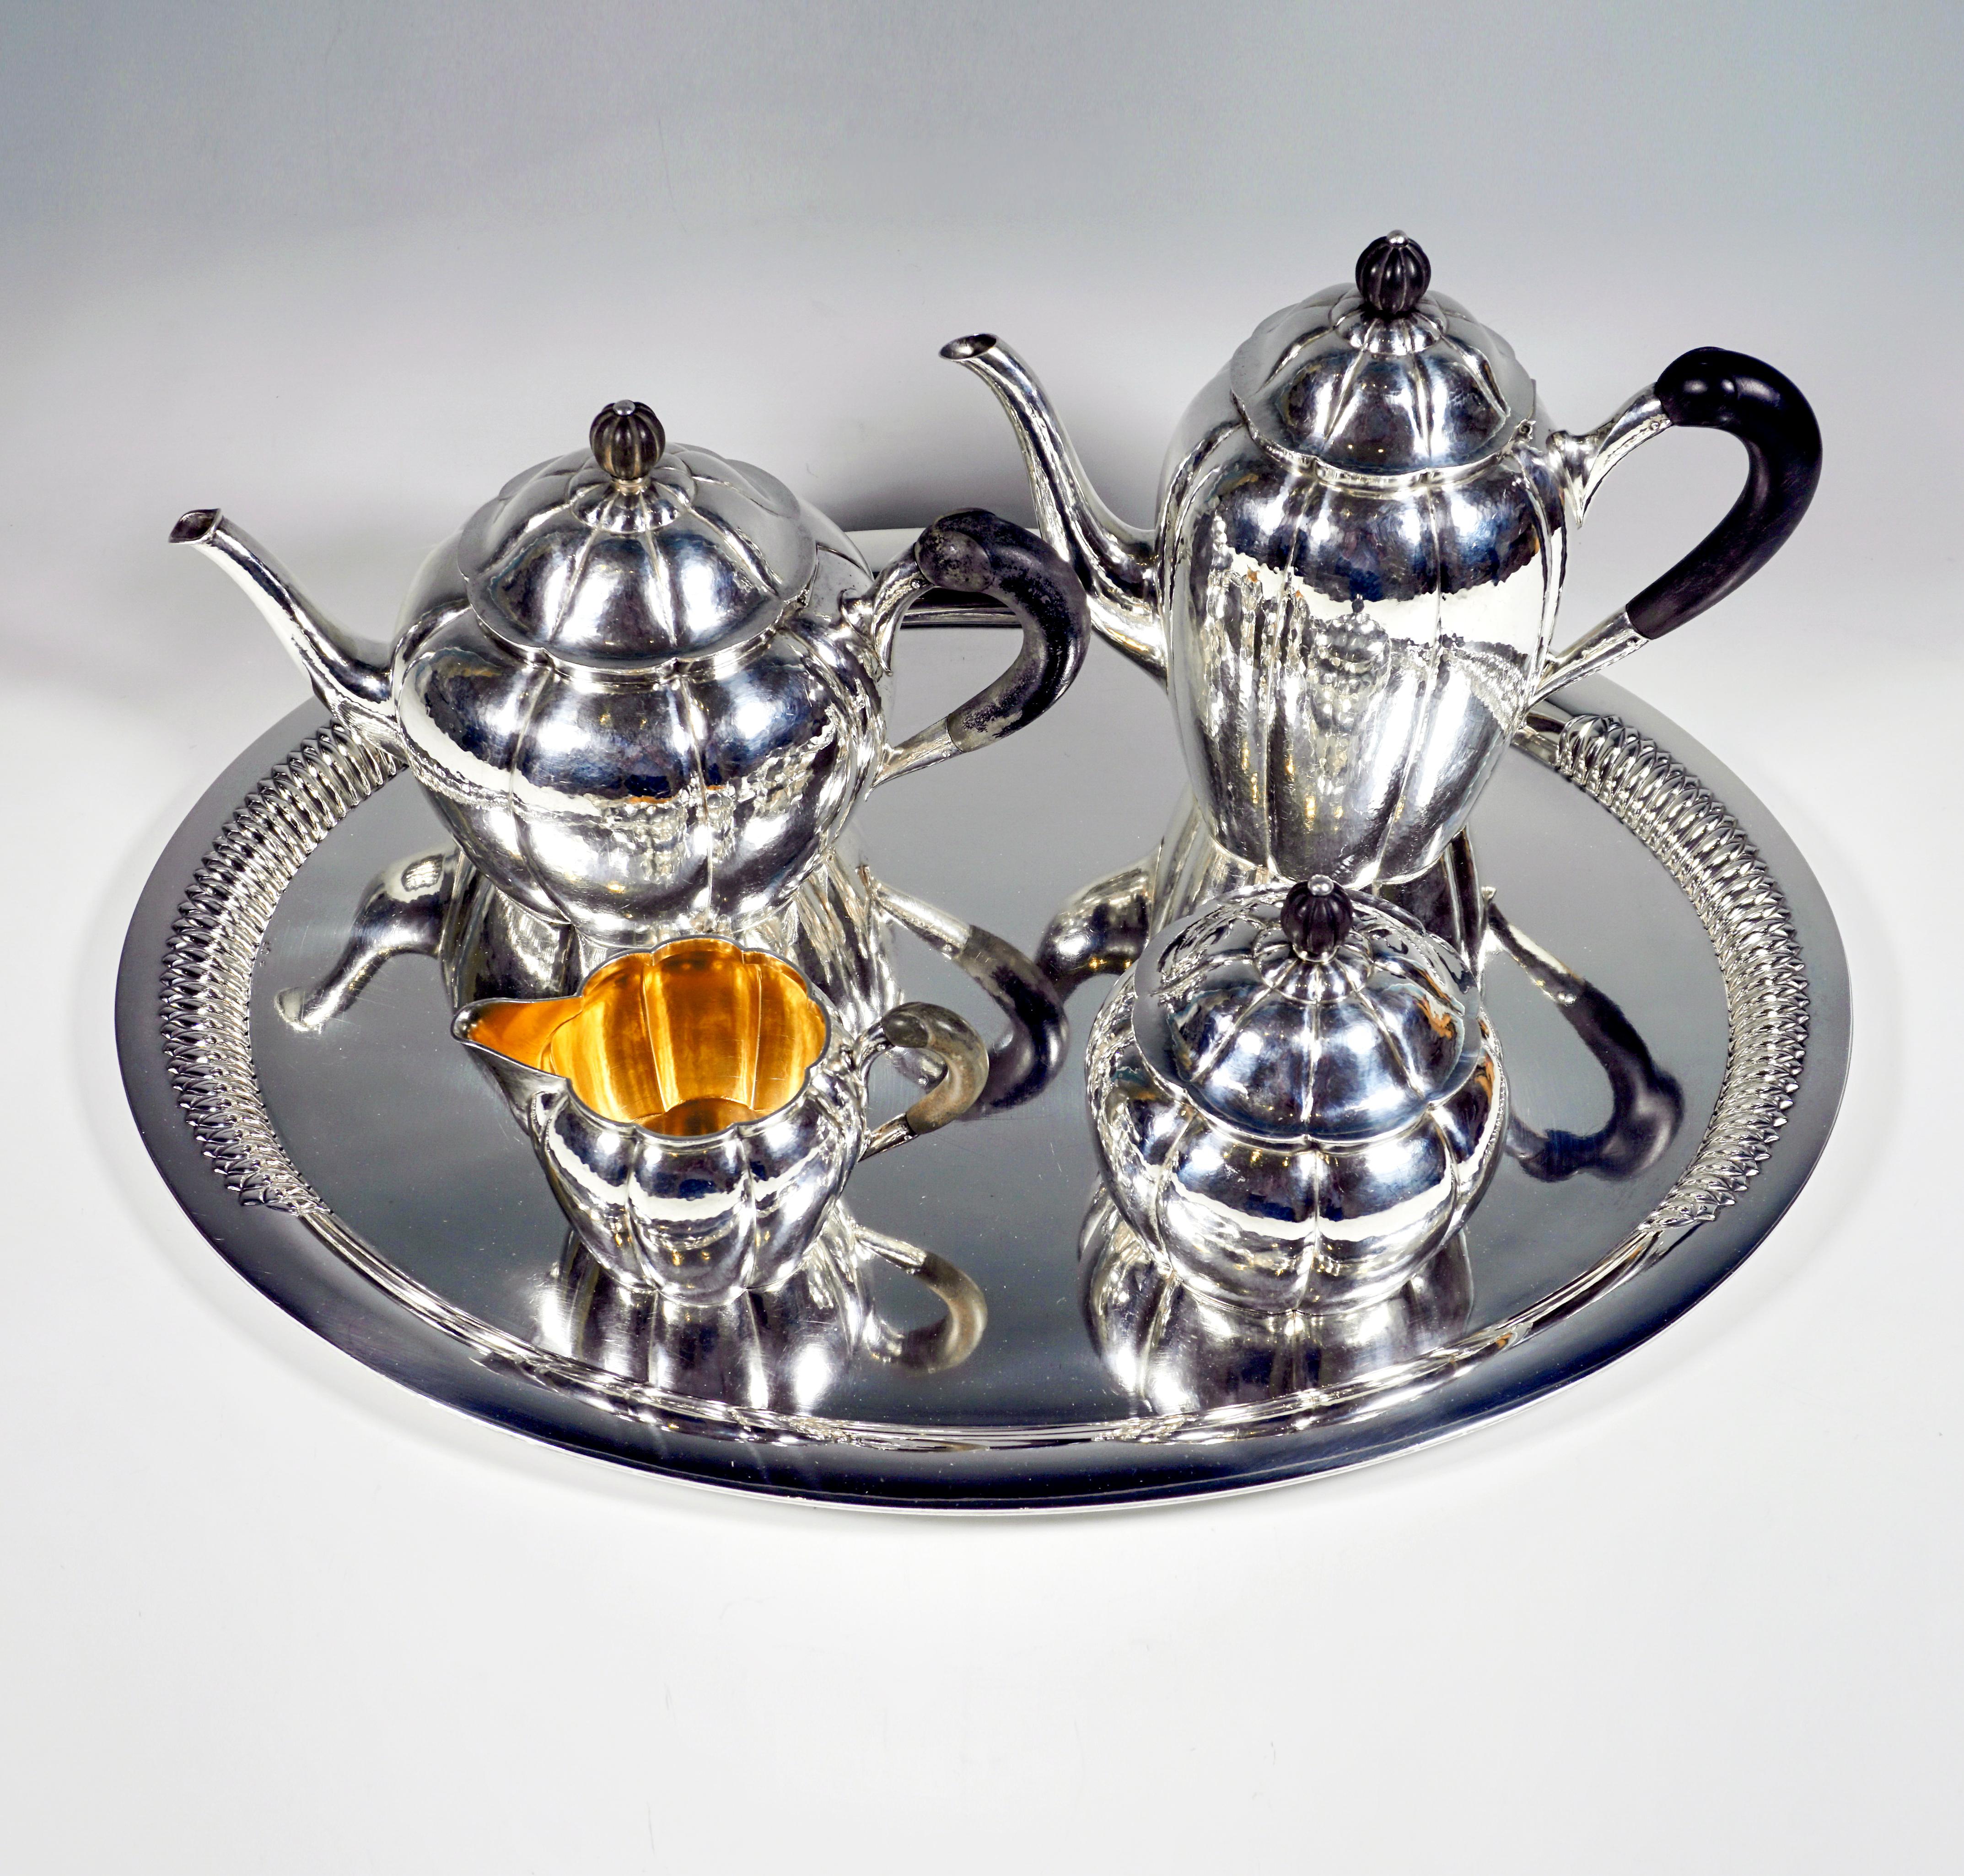 Elegant 5-piece silver centerpiece consisting of a coffee pot, teapot, milk jug, sugar bowl and a tray.
Bulbous, raised vessels, narrowing again towards the opening, with a vertically raised rim on a flush stand, surface subtly hammered, walls